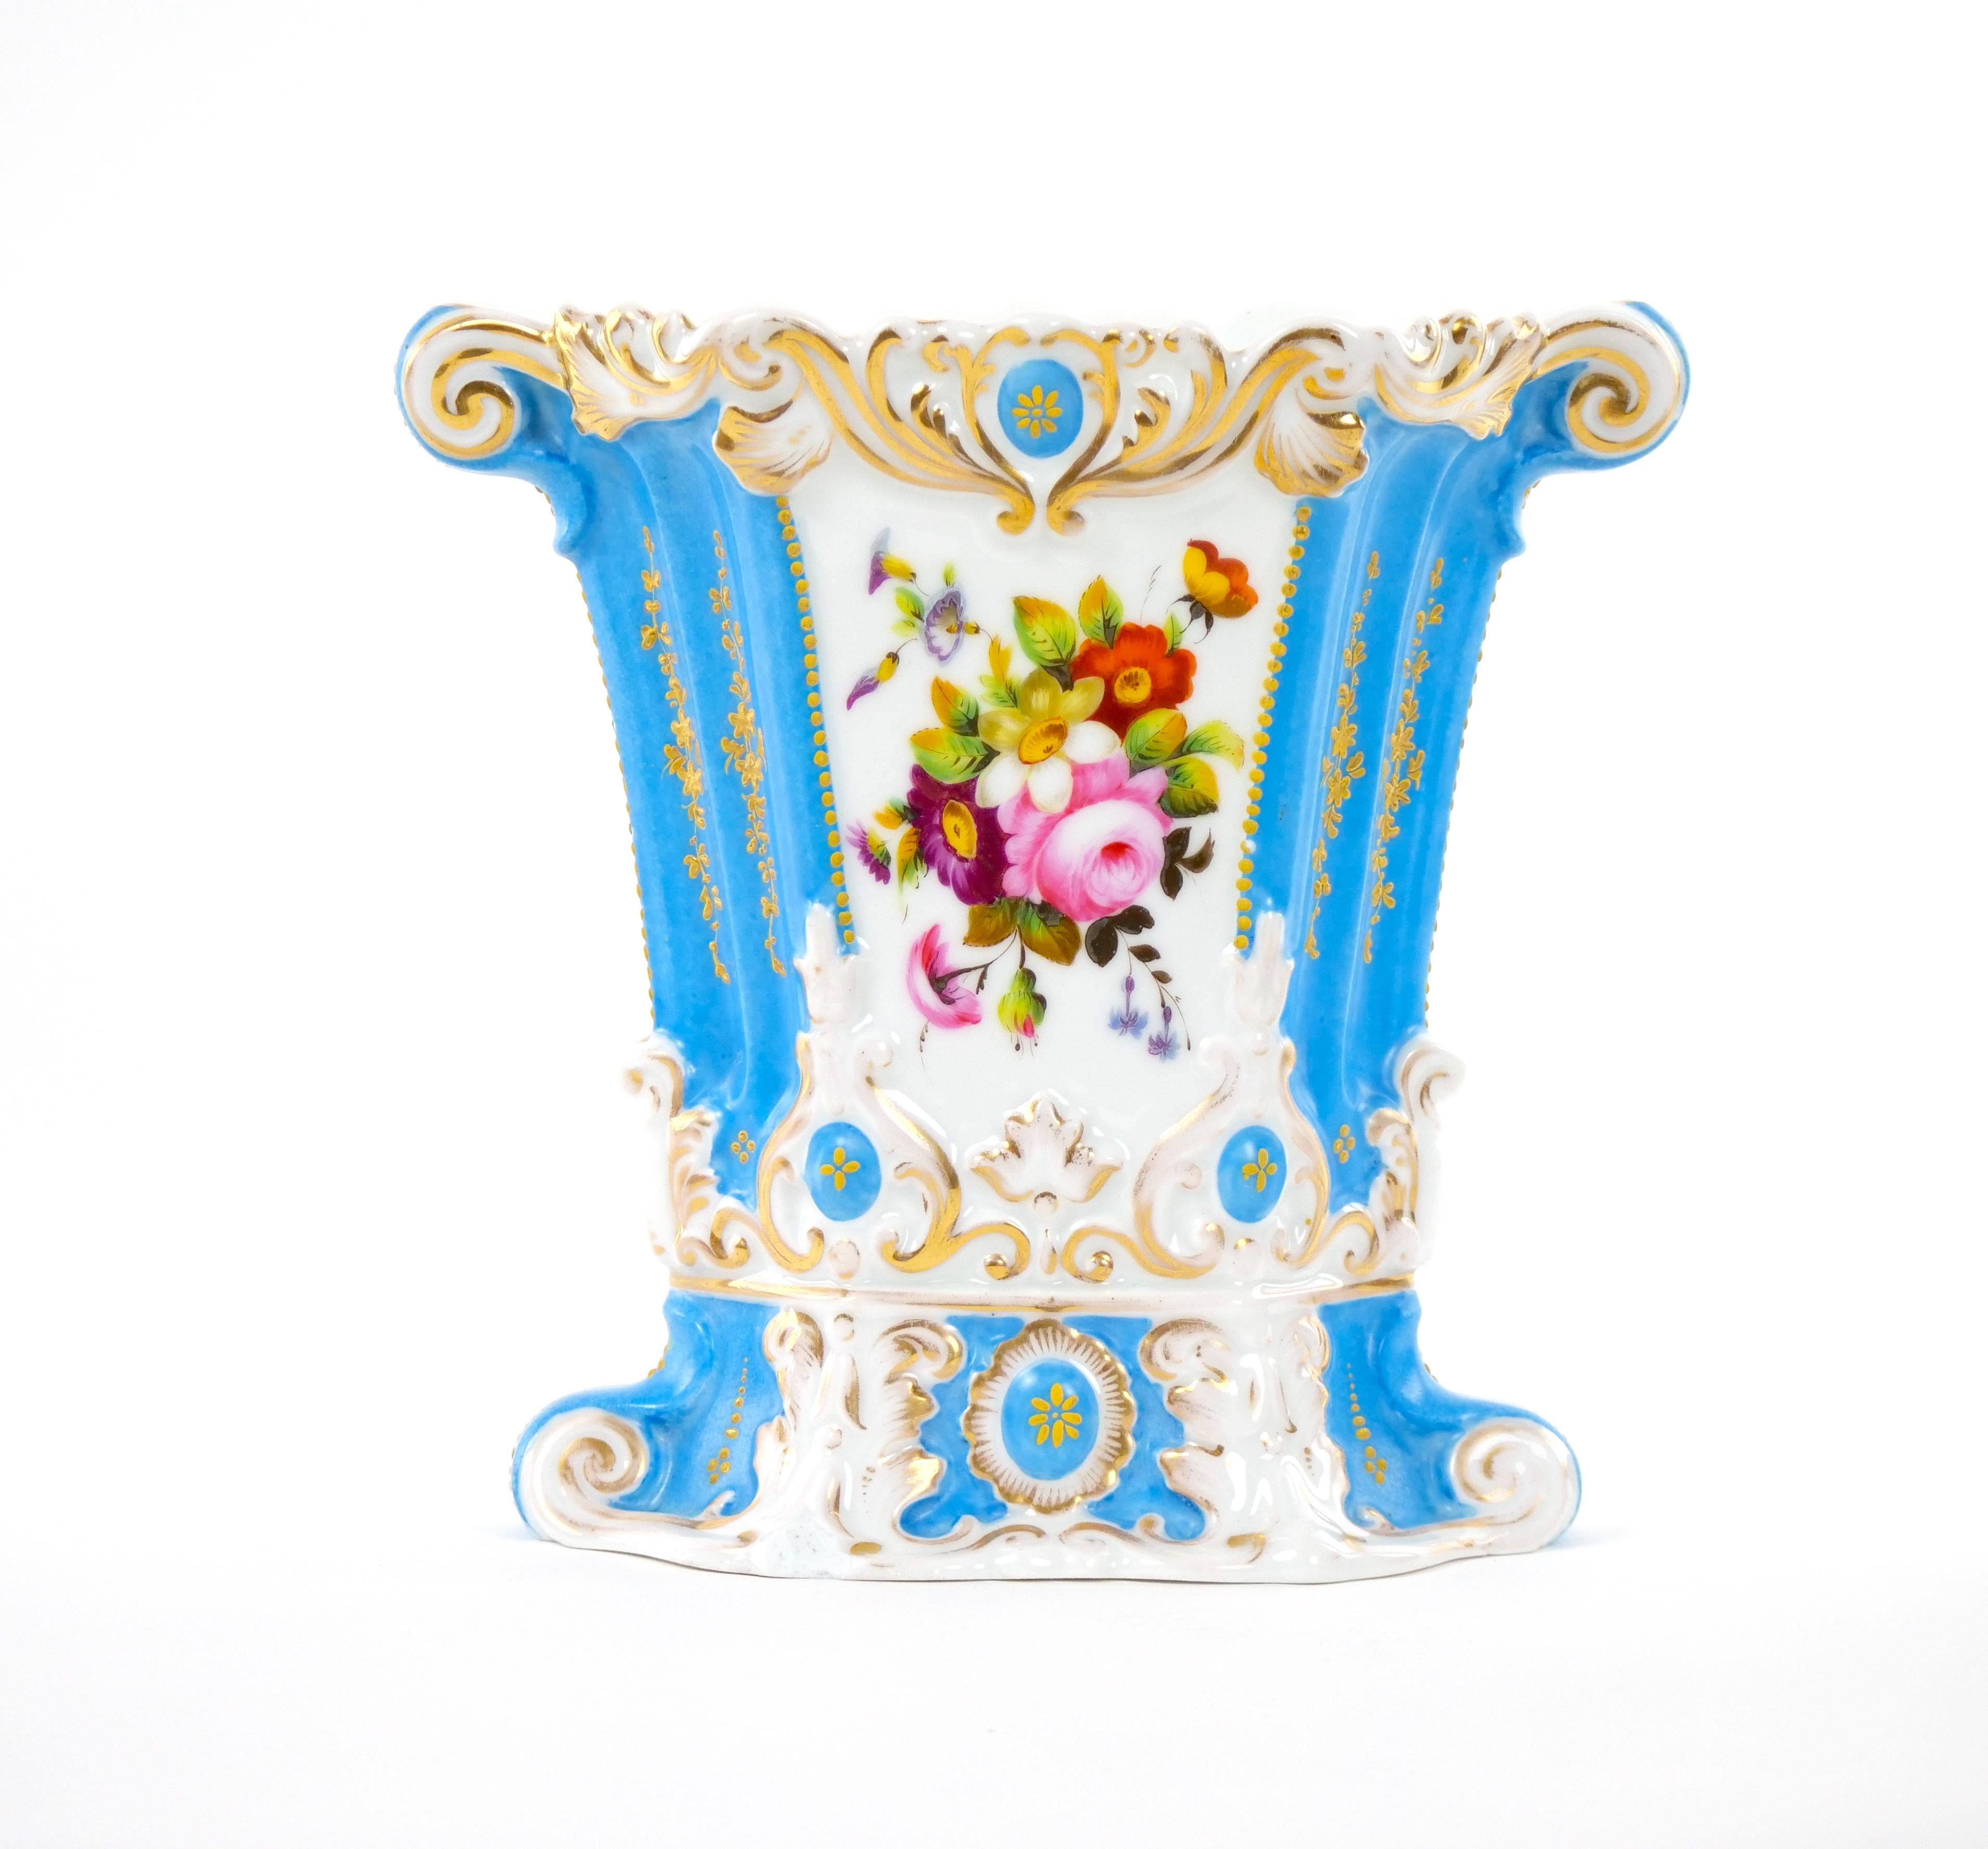 
Experience the allure of a bygone era with this exquisite early 20th century hand-painted and gilt decorated old paris porcelain vase. Immerse yourself in the rich history and artistic craftsmanship that this remarkable piece embodies. Crafted with